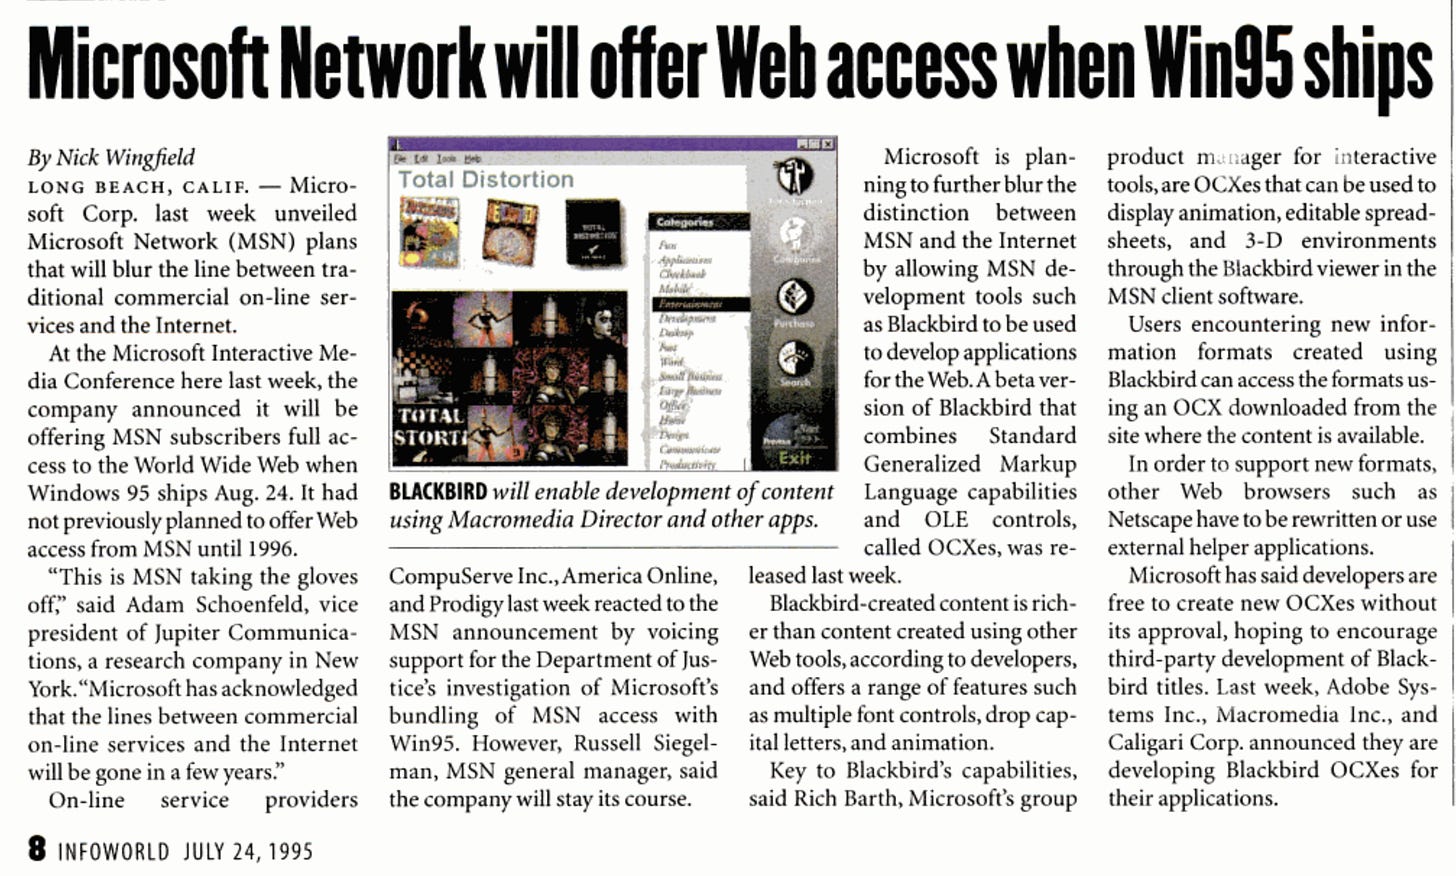 Infoworld from 4 weeks prior to Windows 95 availability, Microsoft Network will offer Web access when Win95 ships.